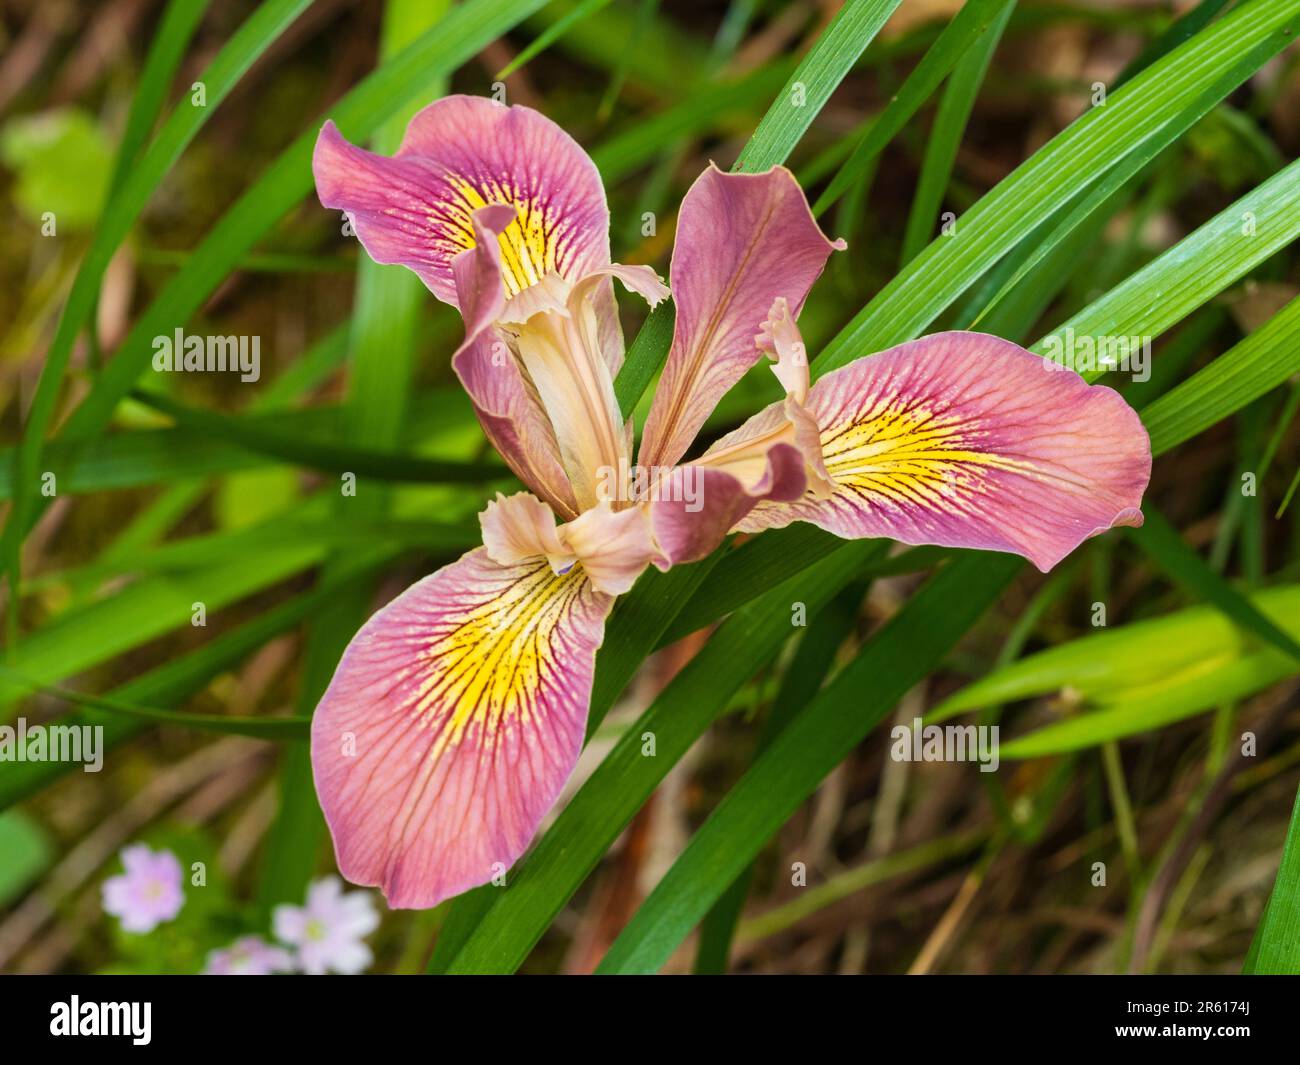 Yellow throated pink flower of the hardy perennial, late spring blooming Pacific Coast hybrid, Iris 'Banbury Gem' Stock Photo